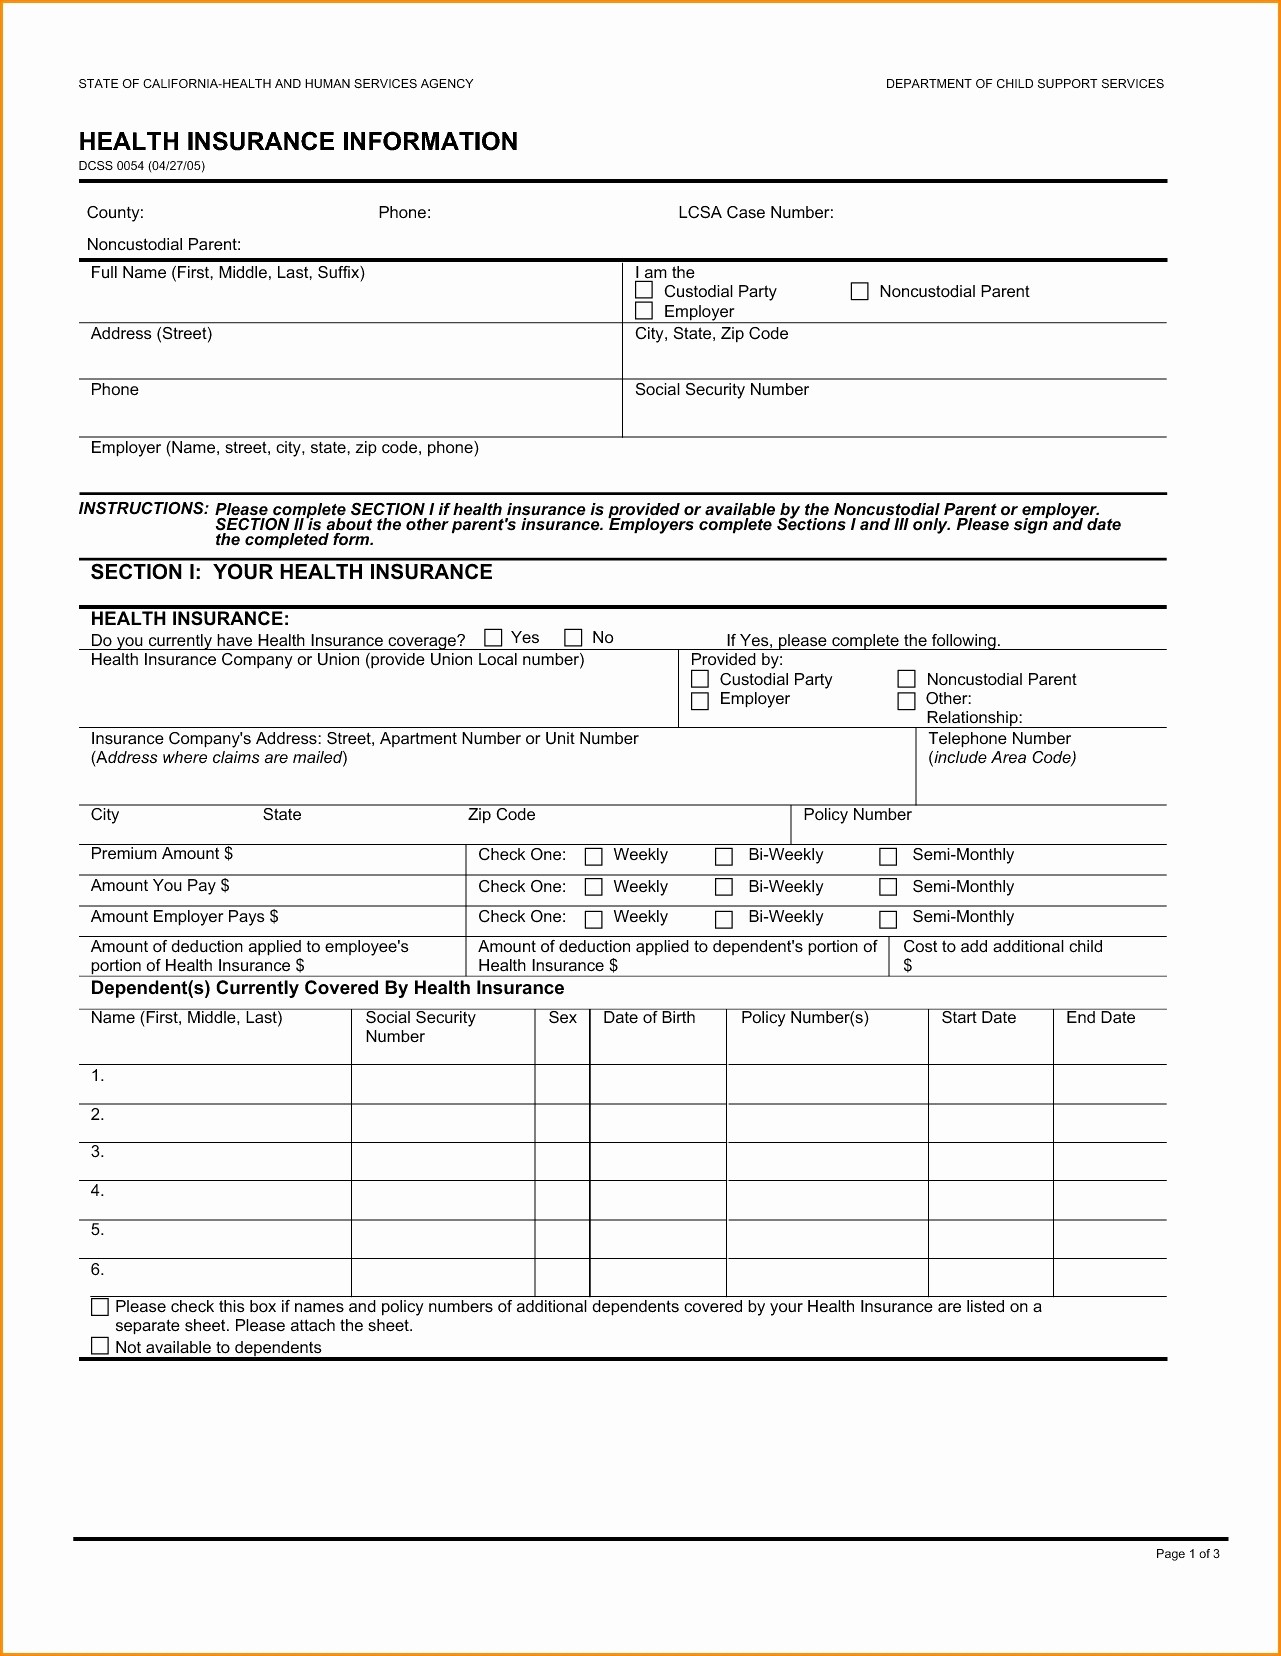 50 New State Farm Insurance Template DOCUMENTS IDEAS